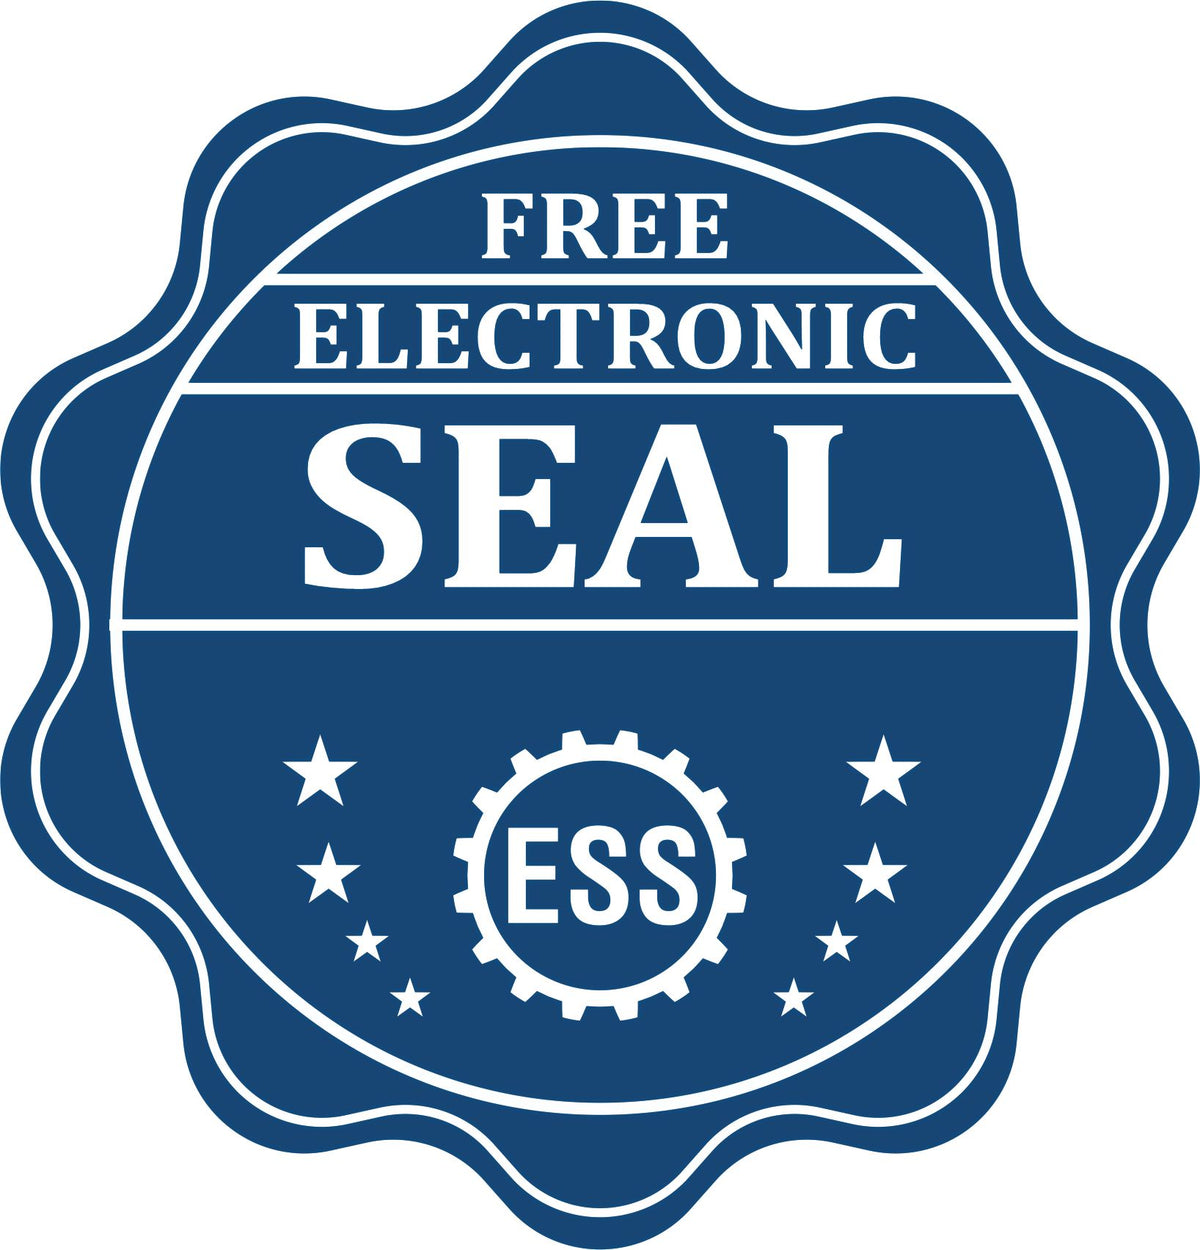 A badge showing a free electronic seal for the Heavy Duty Cast Iron Missouri Land Surveyor Seal Embosser with stars and the ESS gear on the emblem.